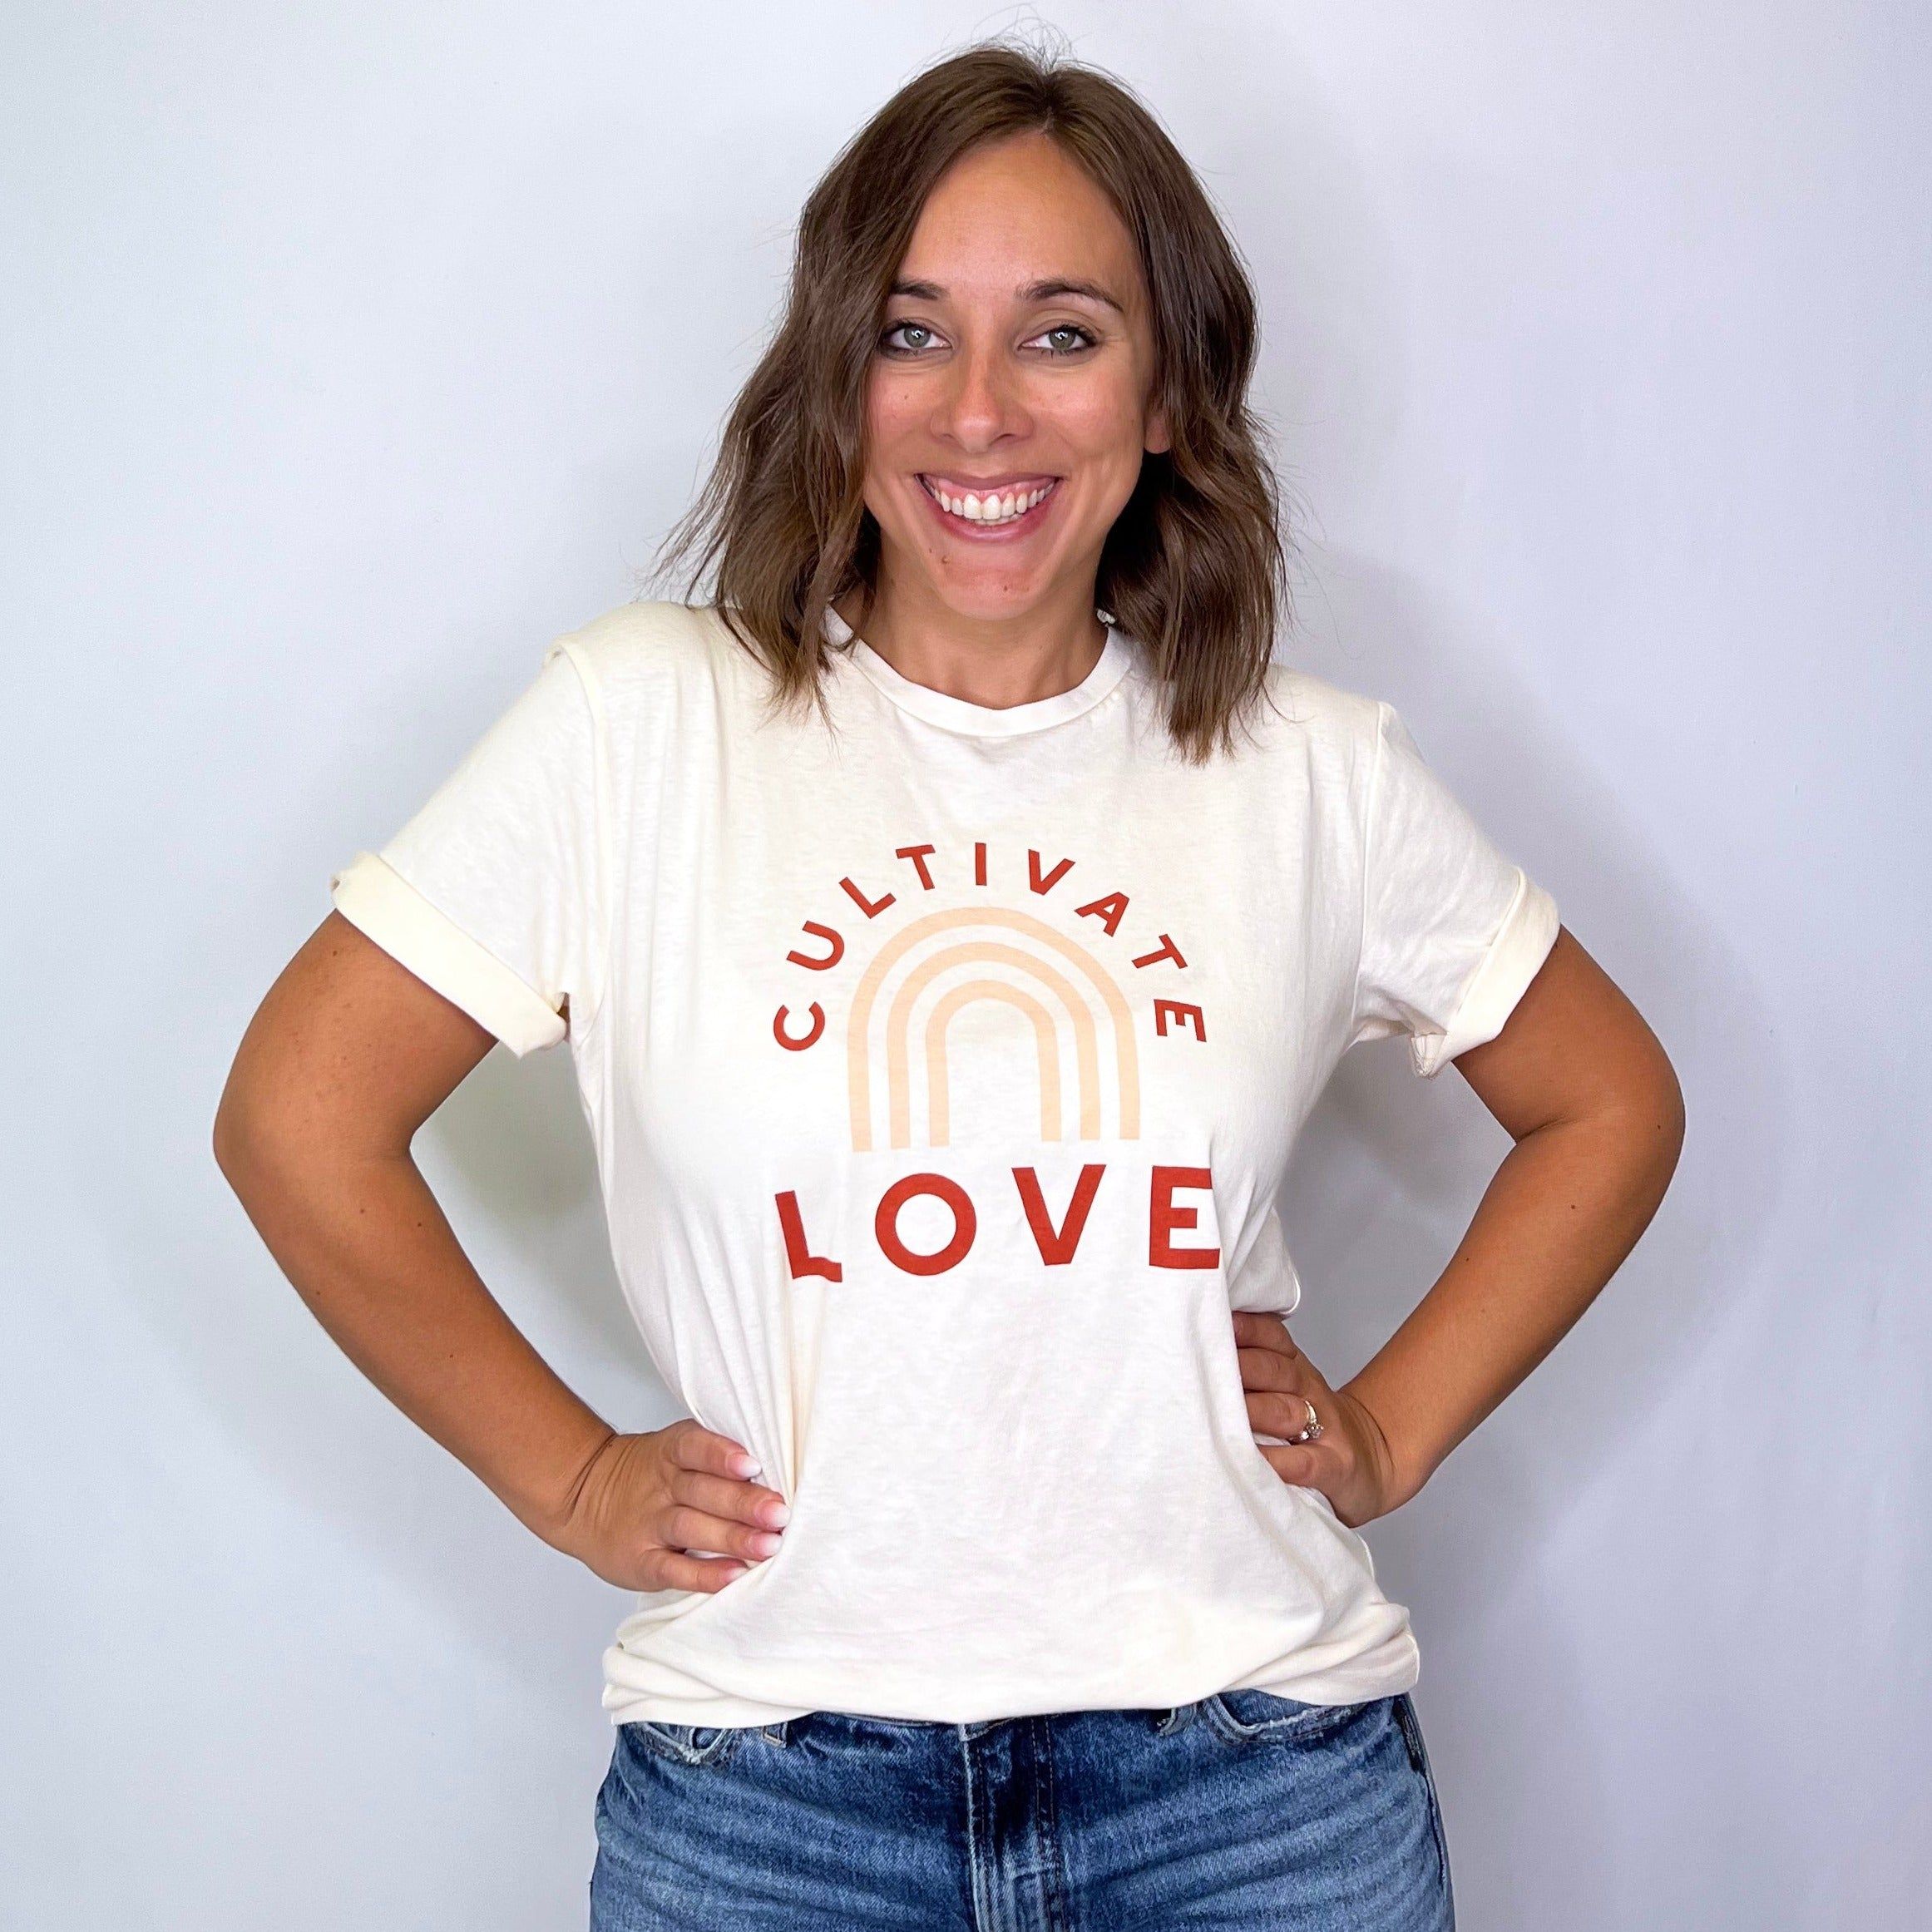 Polished Prints - Cultivate Love Graphic Tee - Arktana - Tops